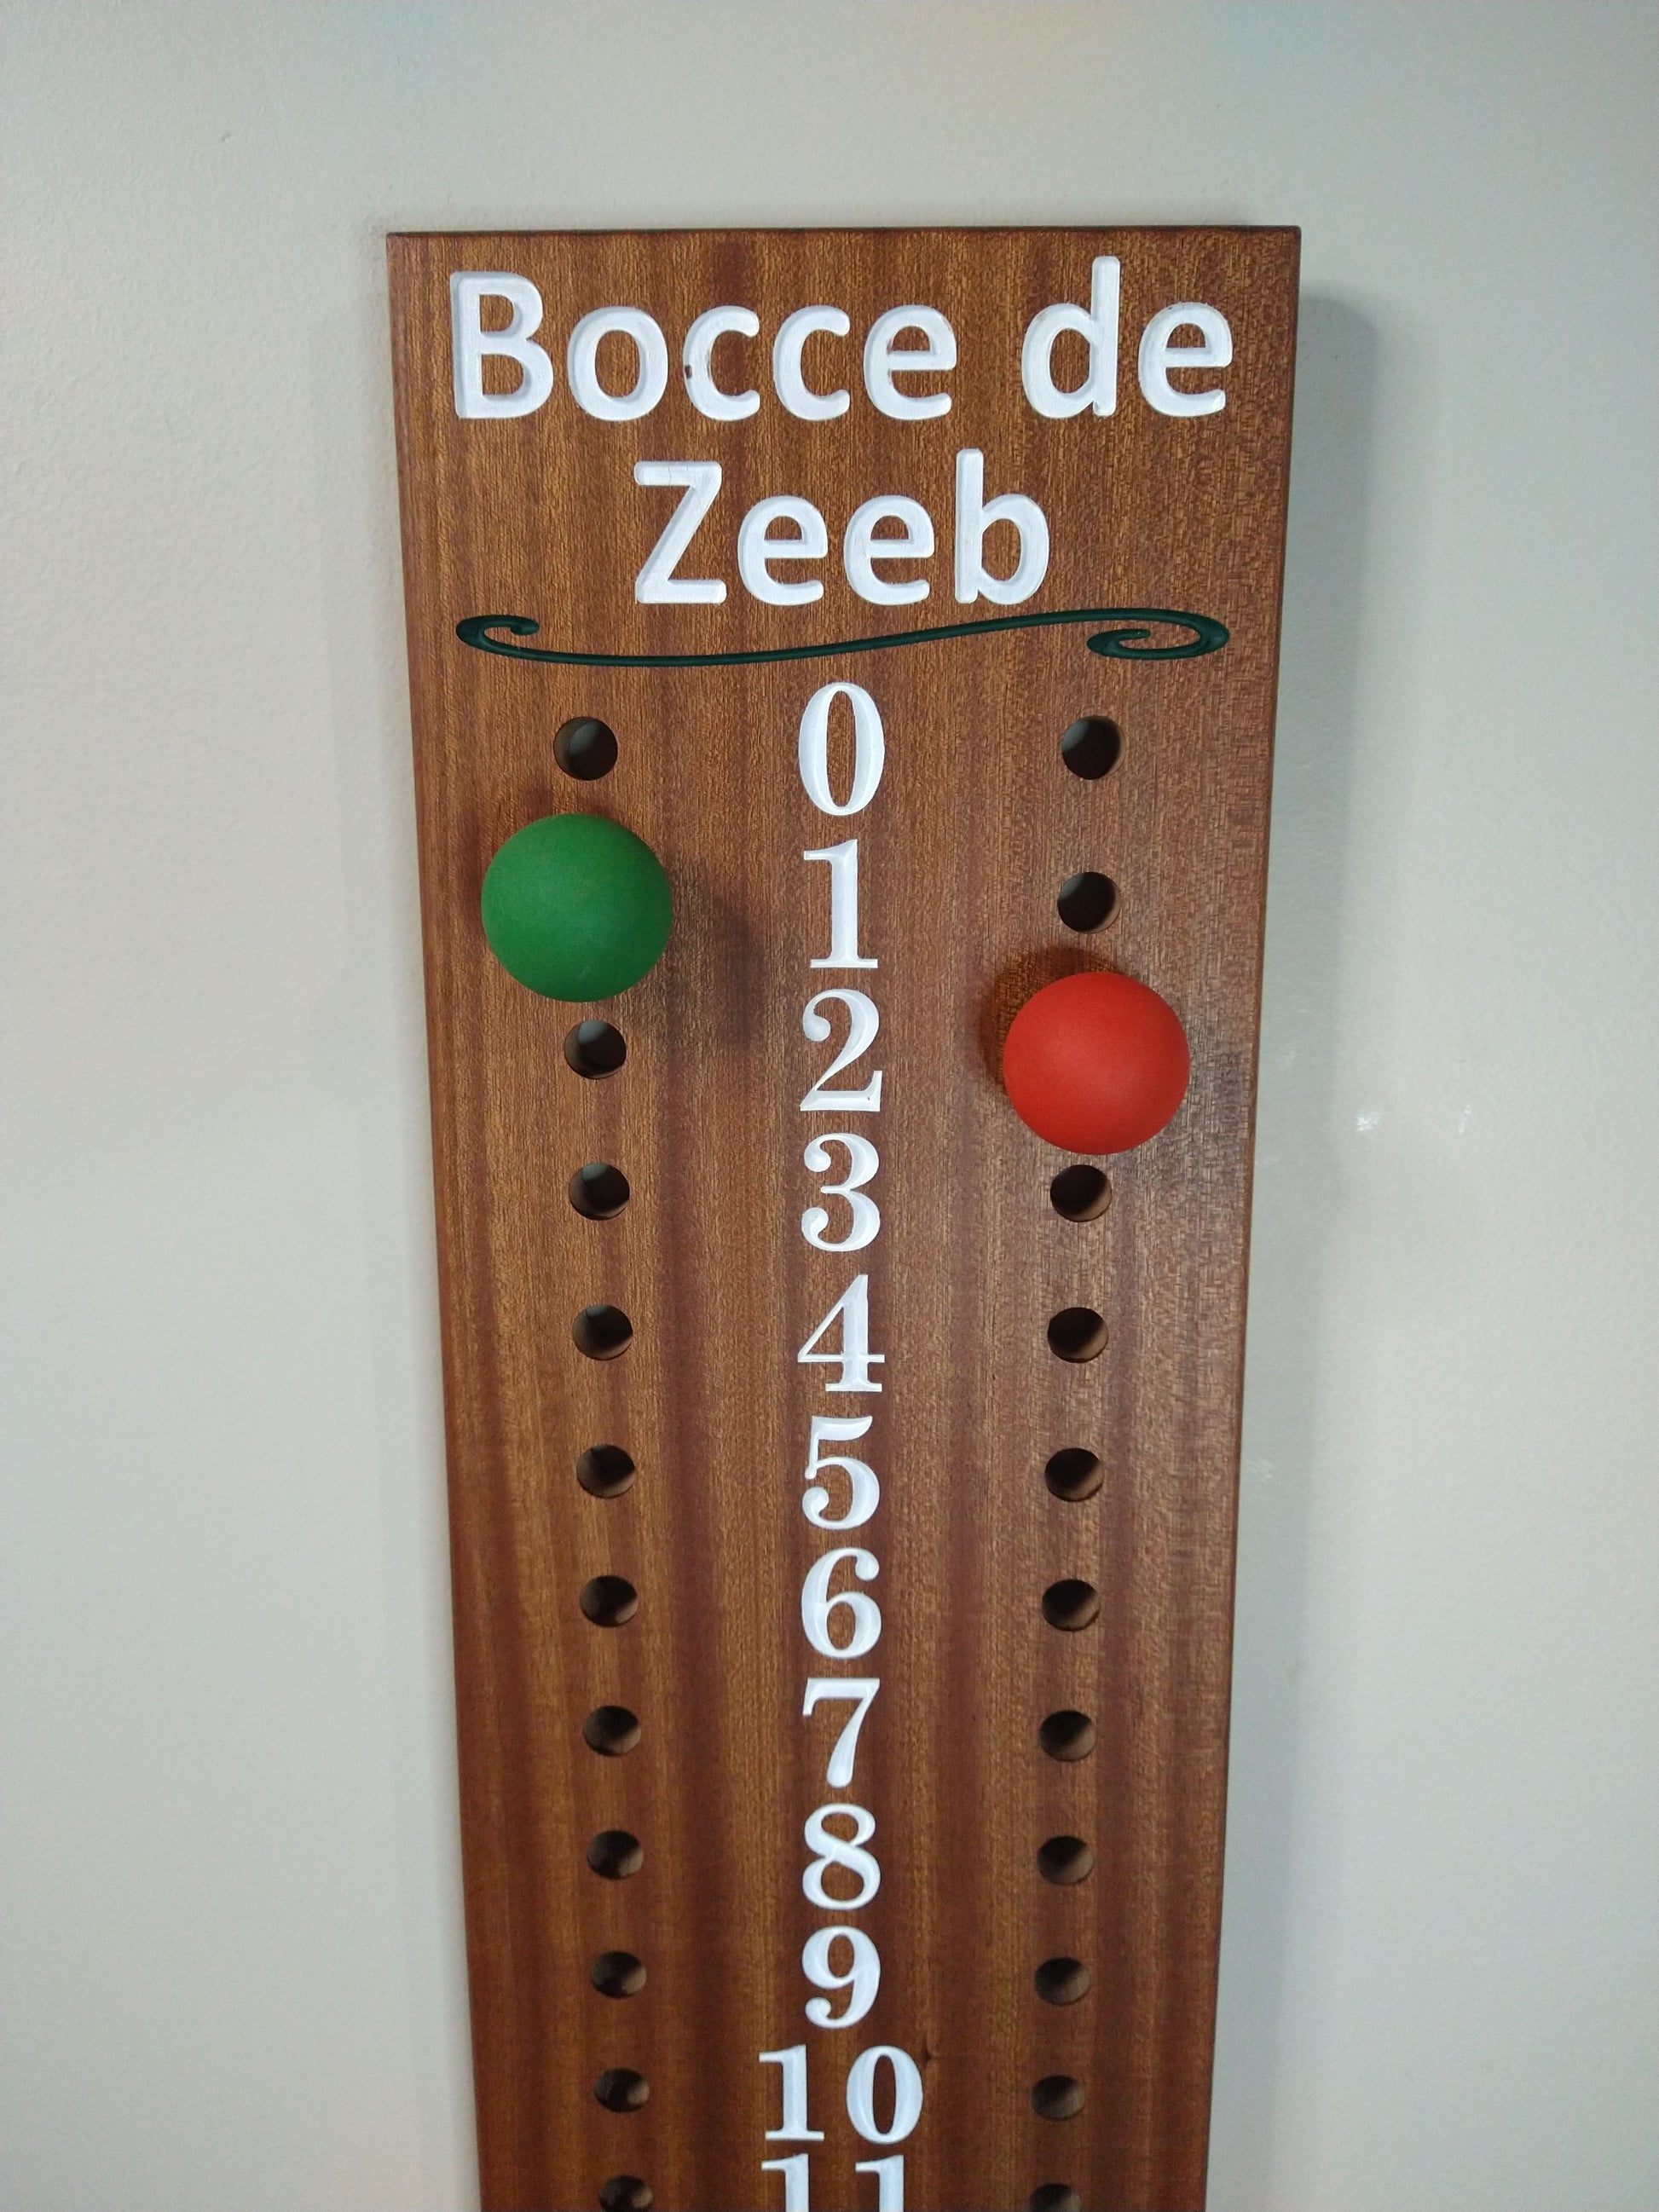 Bocce scoreboard pegs red and green